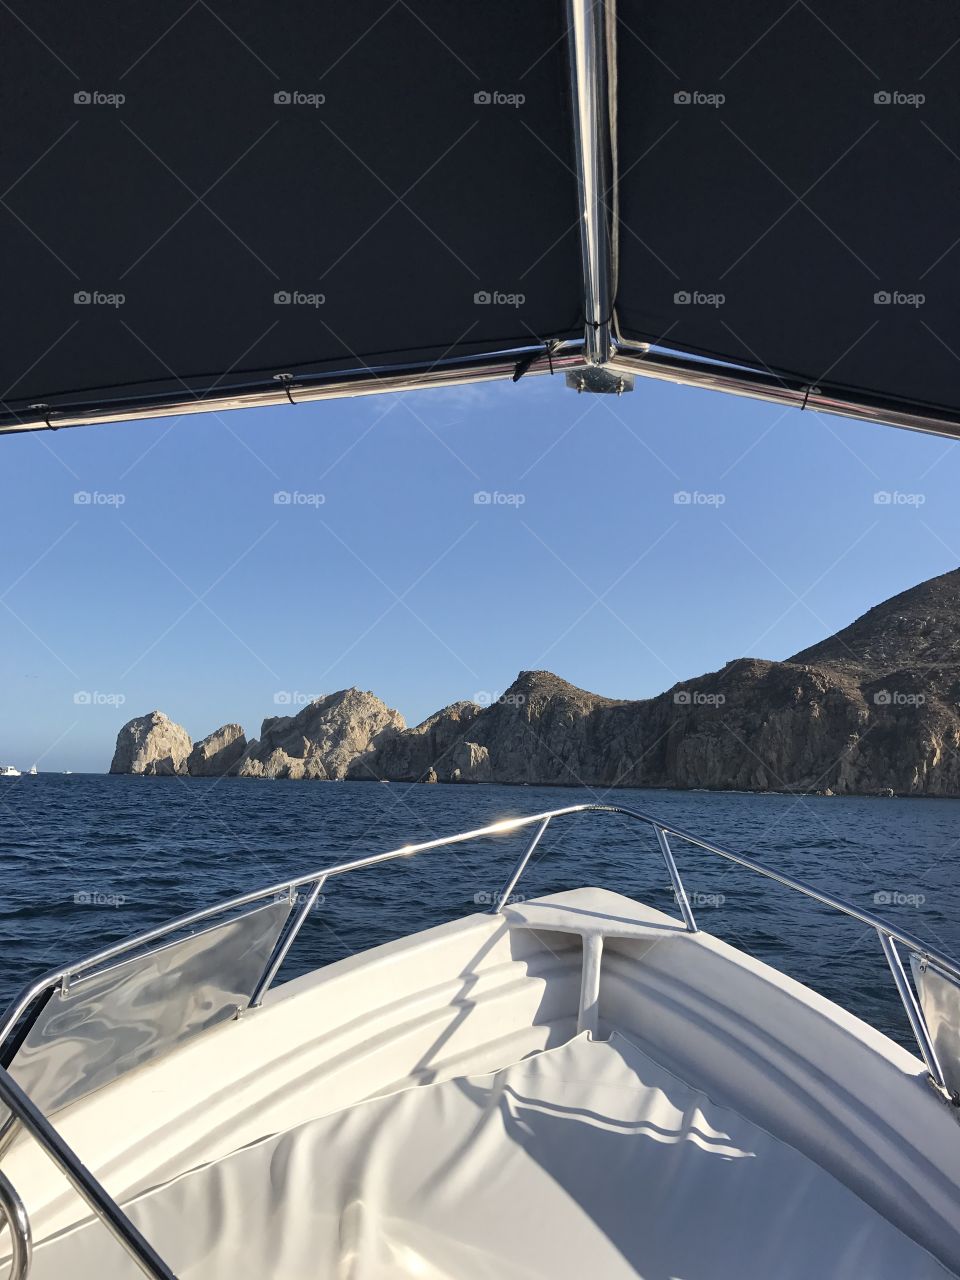 Water taxi in Cabo 